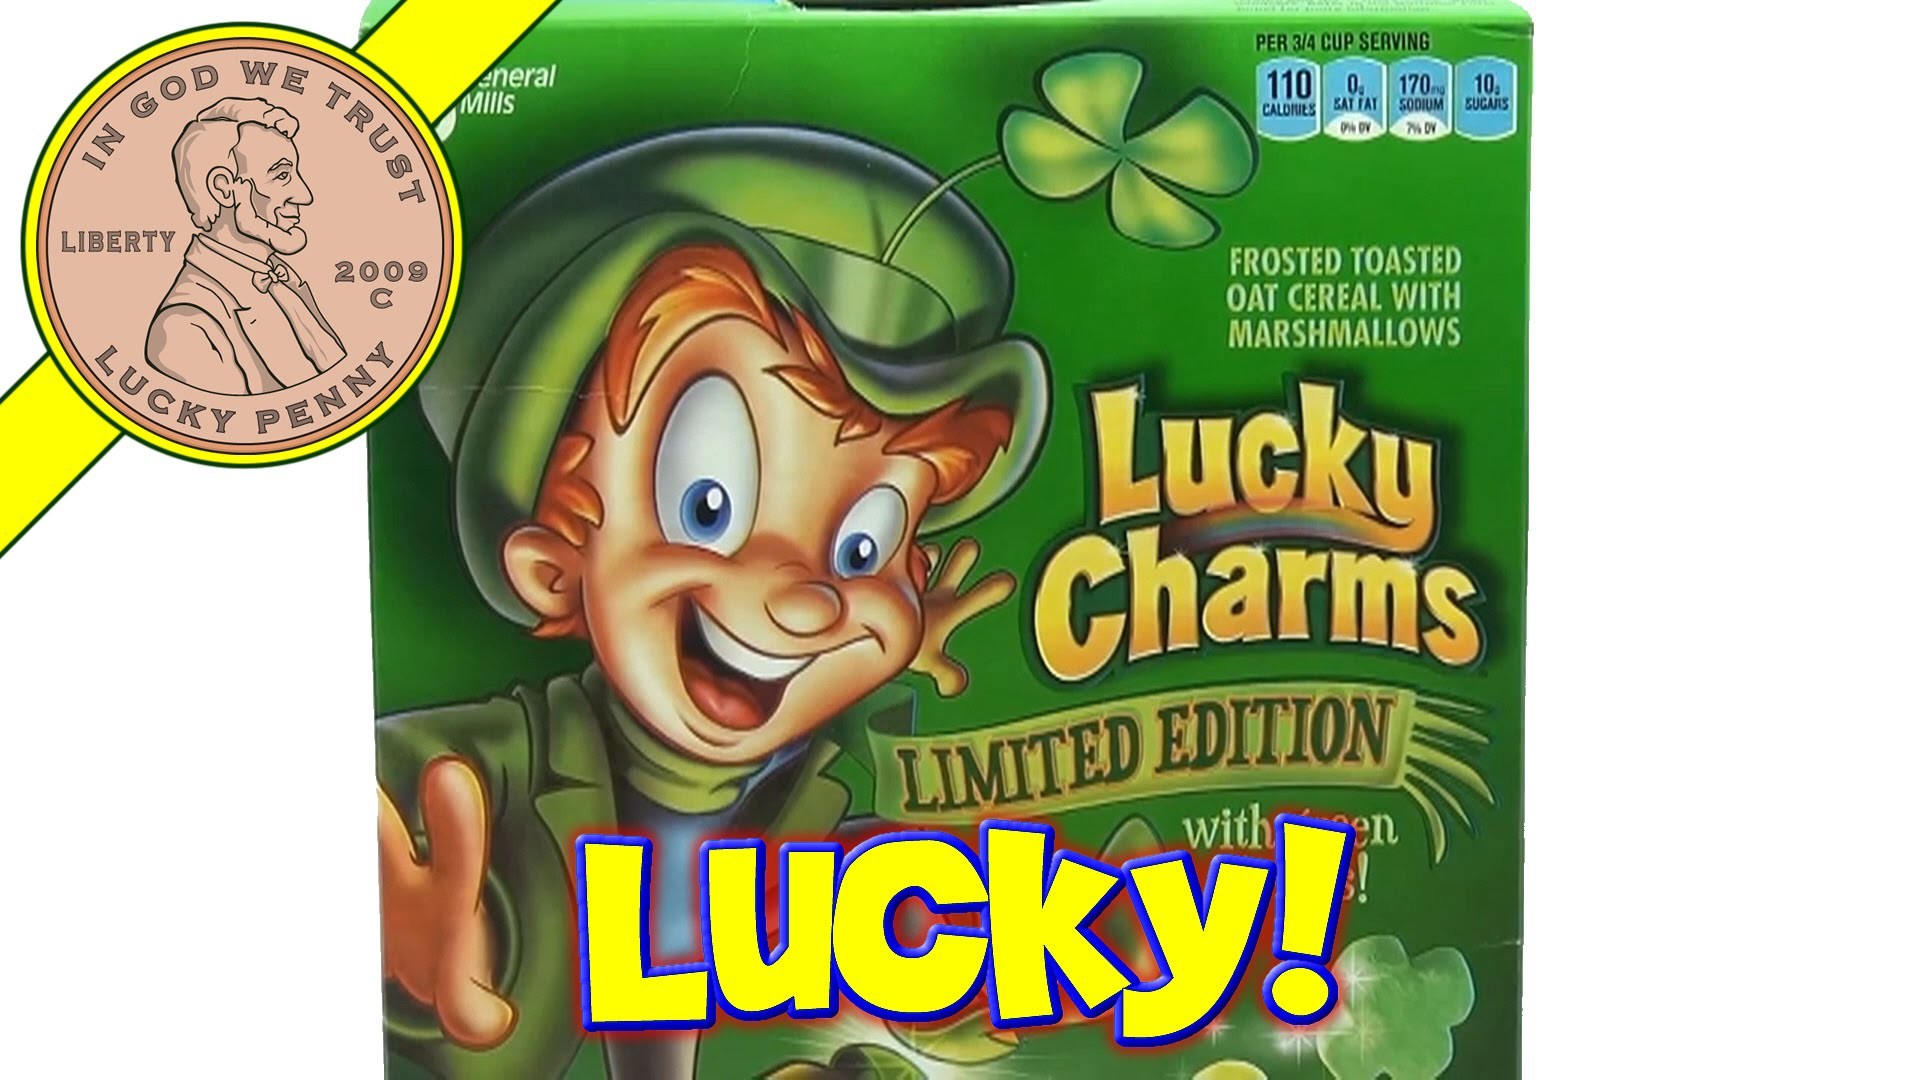 1920x1080 Lucky Charms 2013 Limited Edition Breakfast Cereal - St. Patrick's Day  Green Item